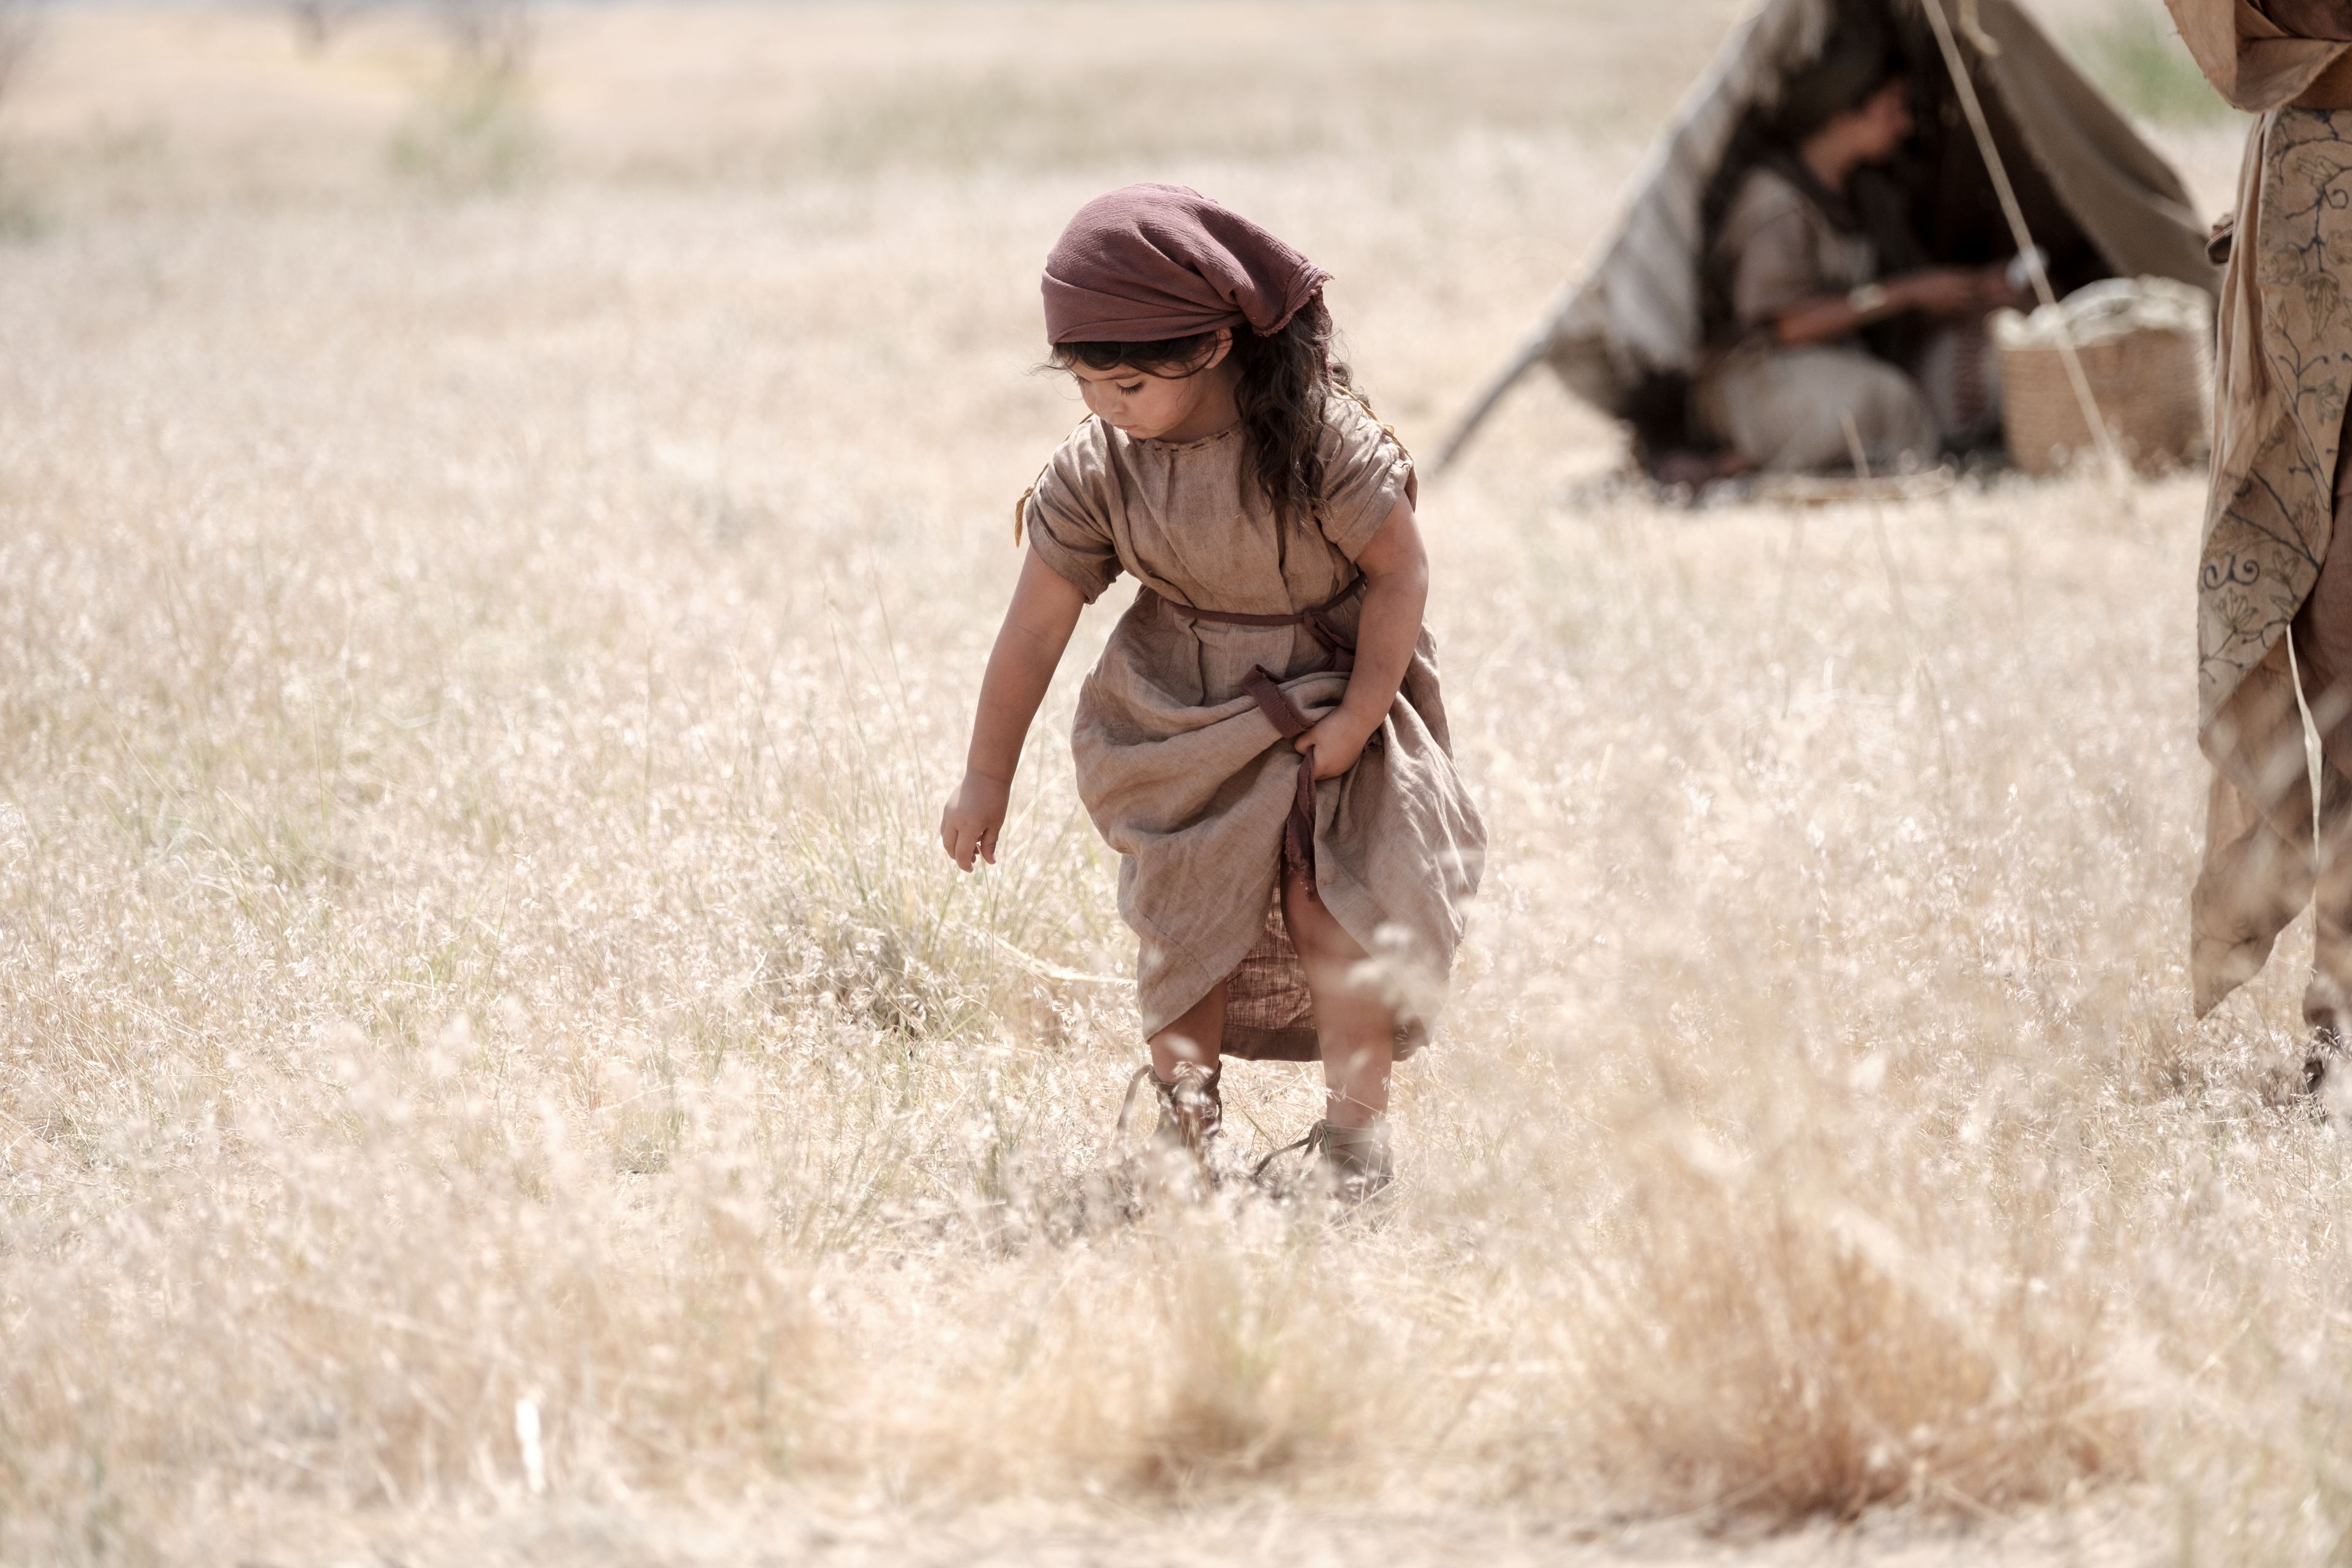 A child in Ishmael's camp walks through the wilderness.